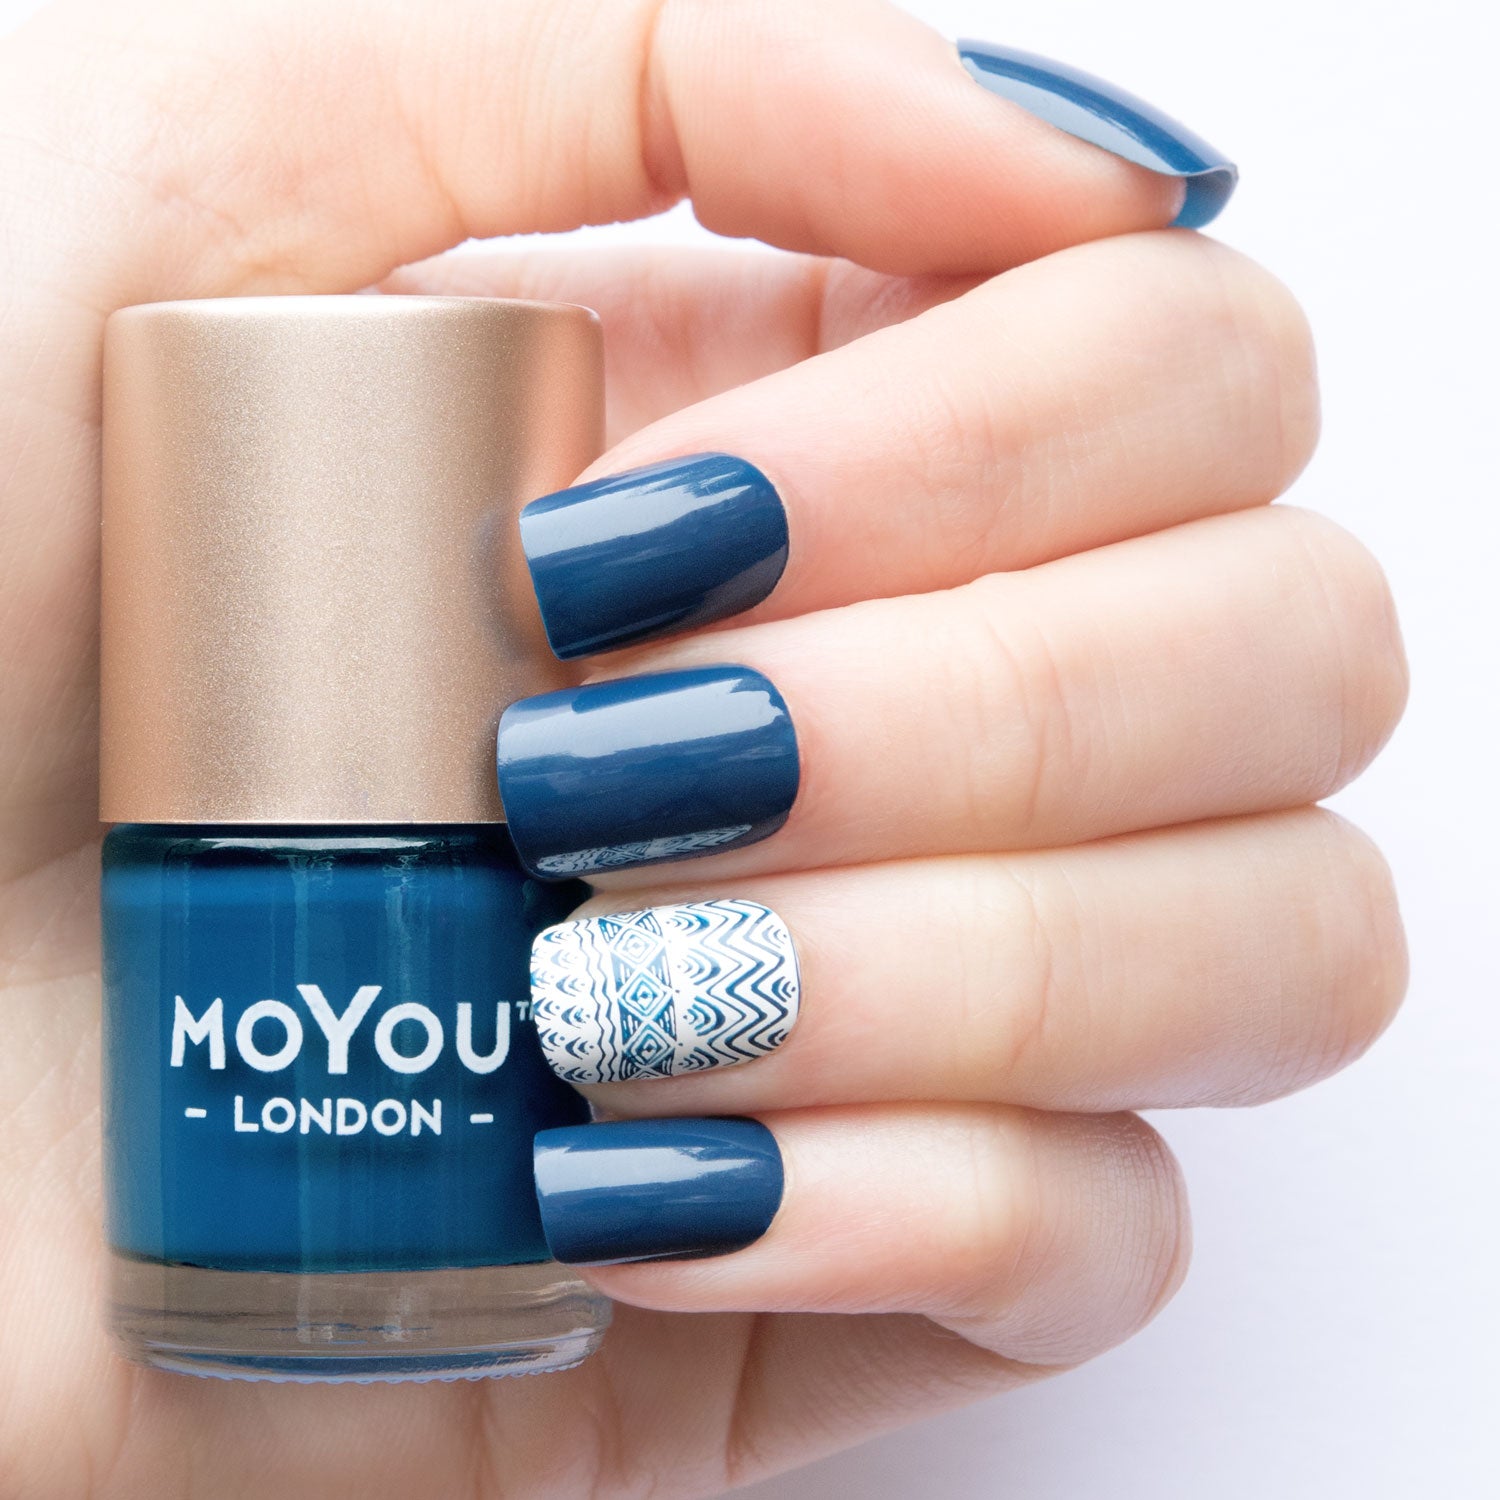 MoYou Vernis pour tampon Midnight madness